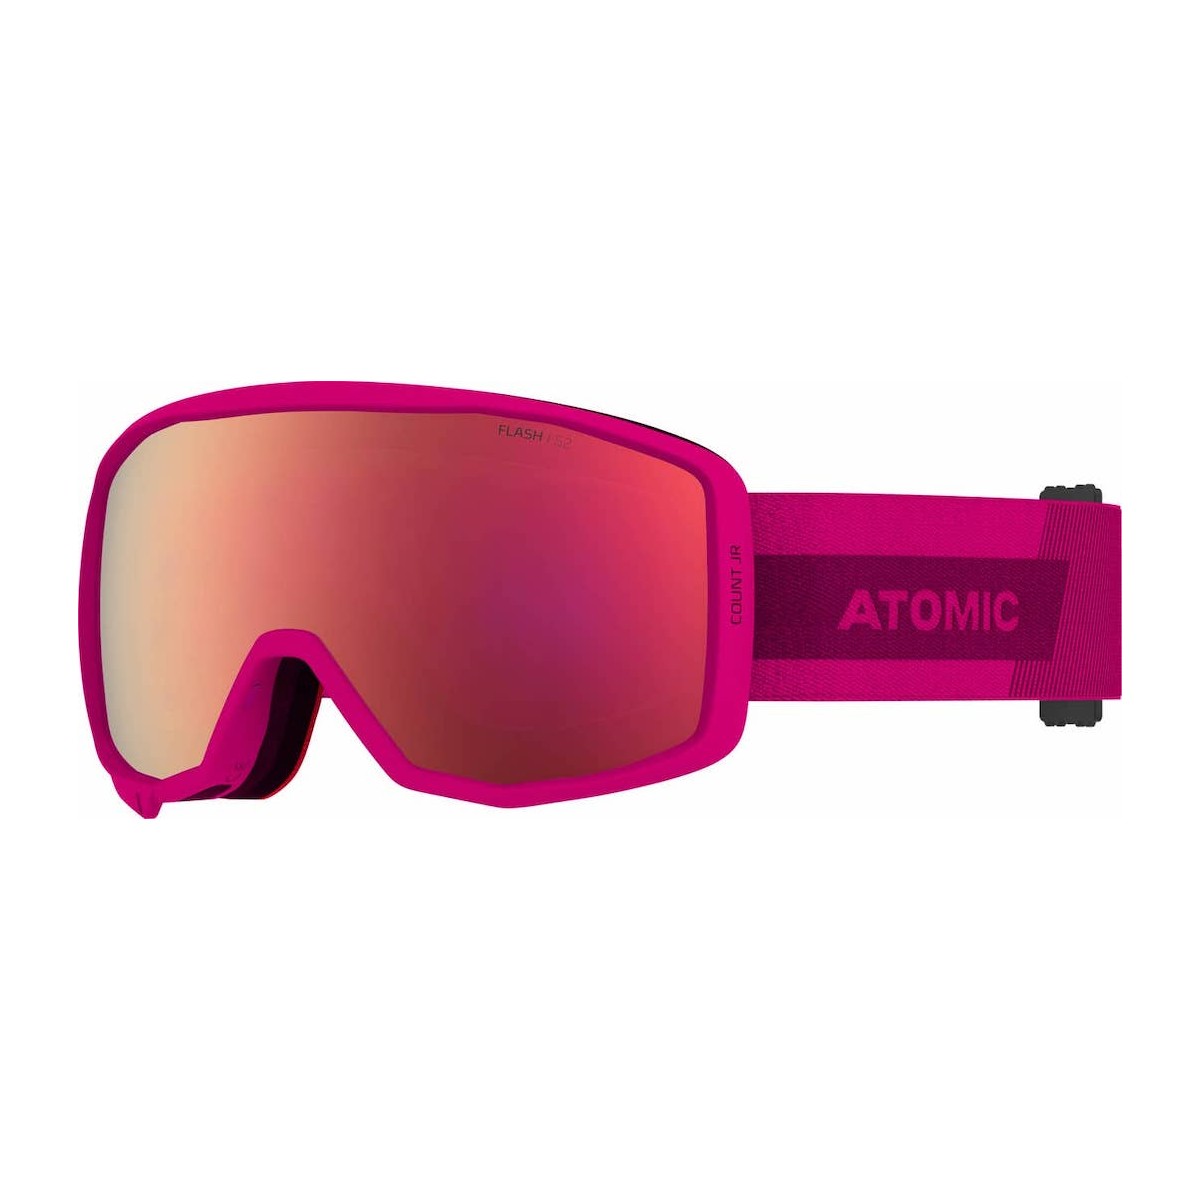 ATOMIC COUNT JR CYLINDRICAL W/RED FLASH C2 brilles - rozā